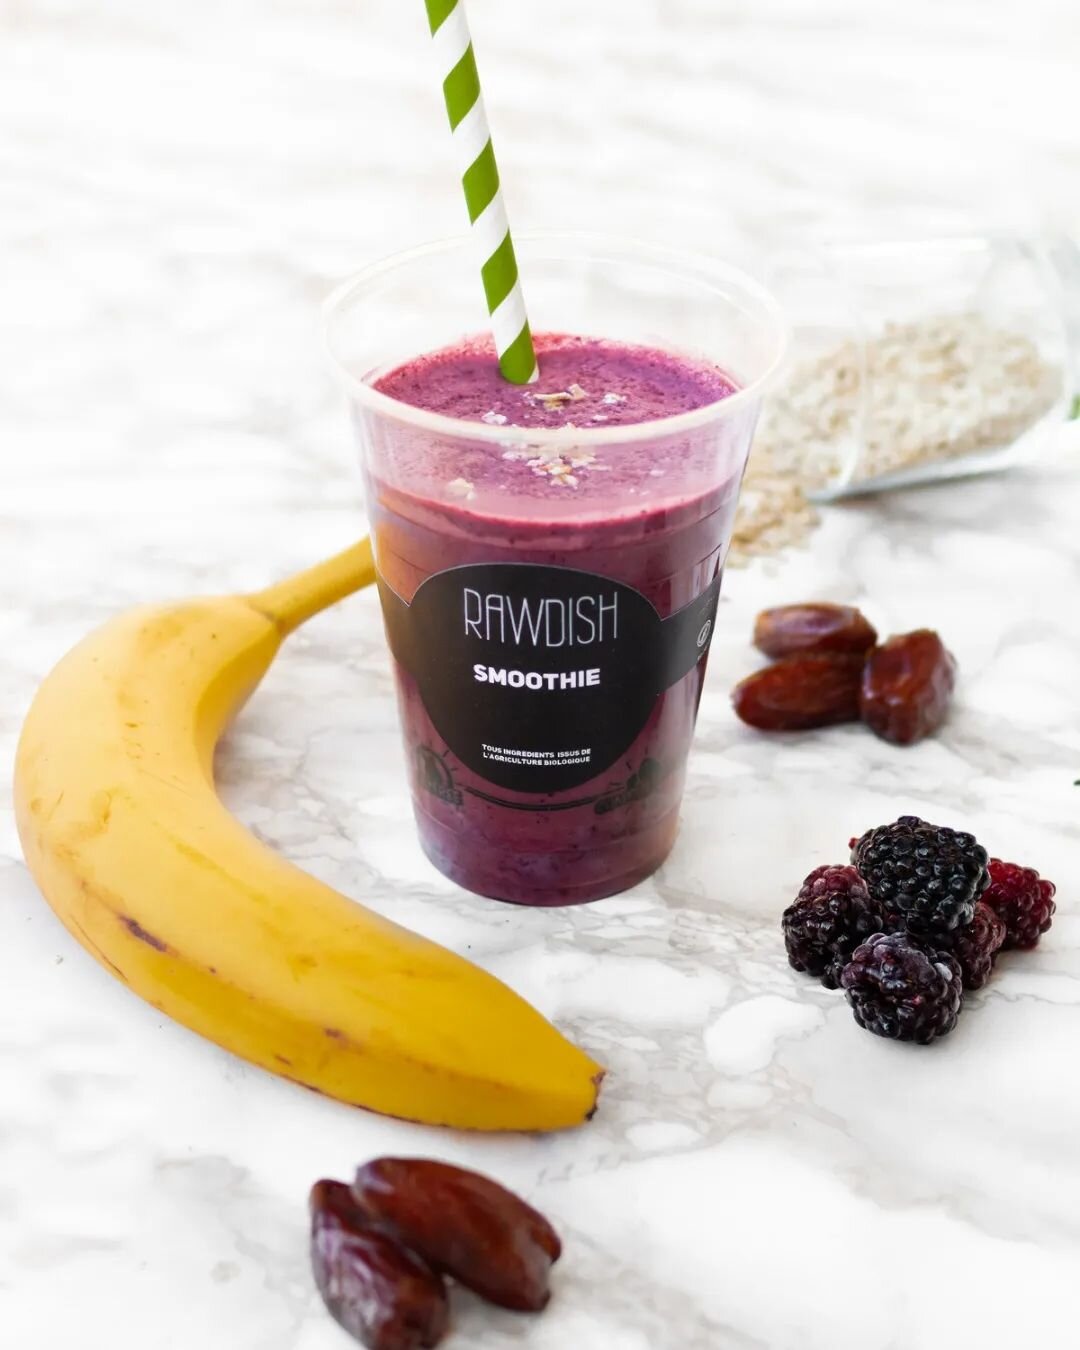 Starting a balanced week right 😎🌤️ with a smoothie on each hand! 😝 Happt Monday people!

#getrawdish #mondaymood
#bio #healthy #go